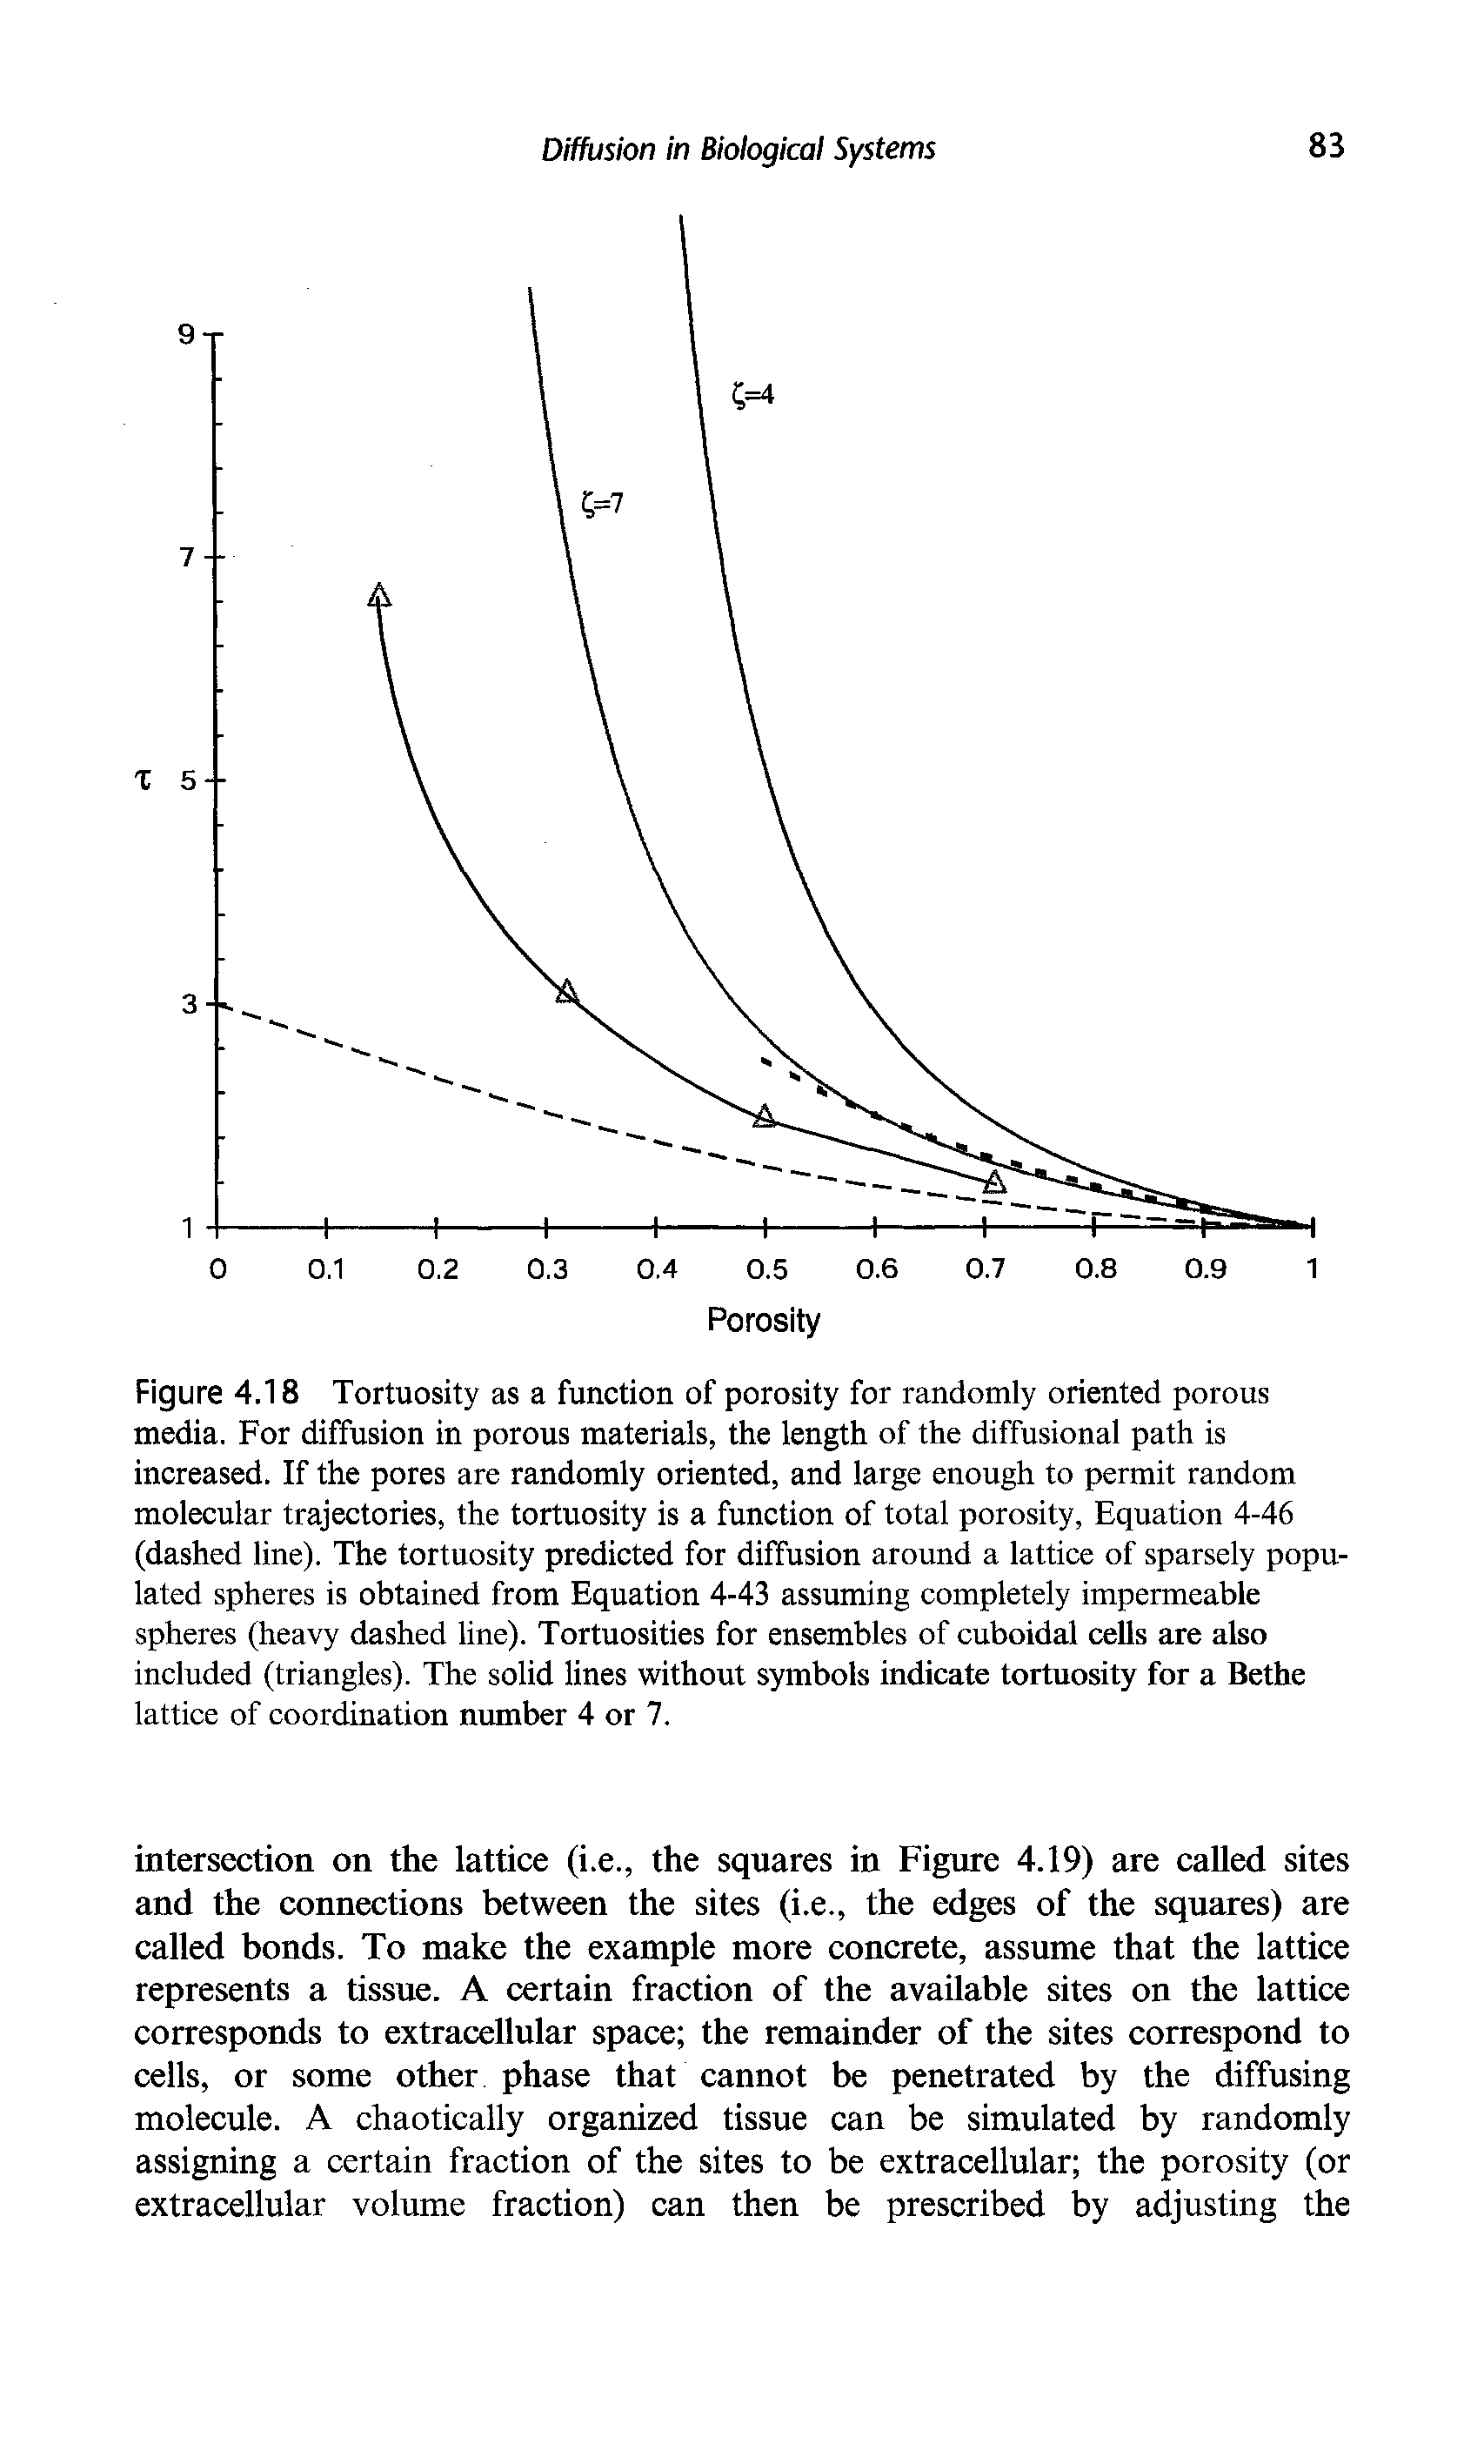 Figure 4.18 Tortuosity as a function of porosity for randomly oriented porous media. For diffusion in porous materials, the length of the diffusional path is increased. If the pores are randomly oriented, and large enough to permit random molecular trajectories, the tortuosity is a function of total porosity. Equation 4-46 (dashed line). The tortuosity predicted for diffusion around a lattice of sparsely populated spheres is obtained from Equation 4-43 assuming completely impermeable spheres (heavy dashed line). Tortuosities for ensembles of cuboidal cells are also included (triangles). The solid lines without symbols indicate tortuosity for a Bethe lattice of coordination number 4 or 7.